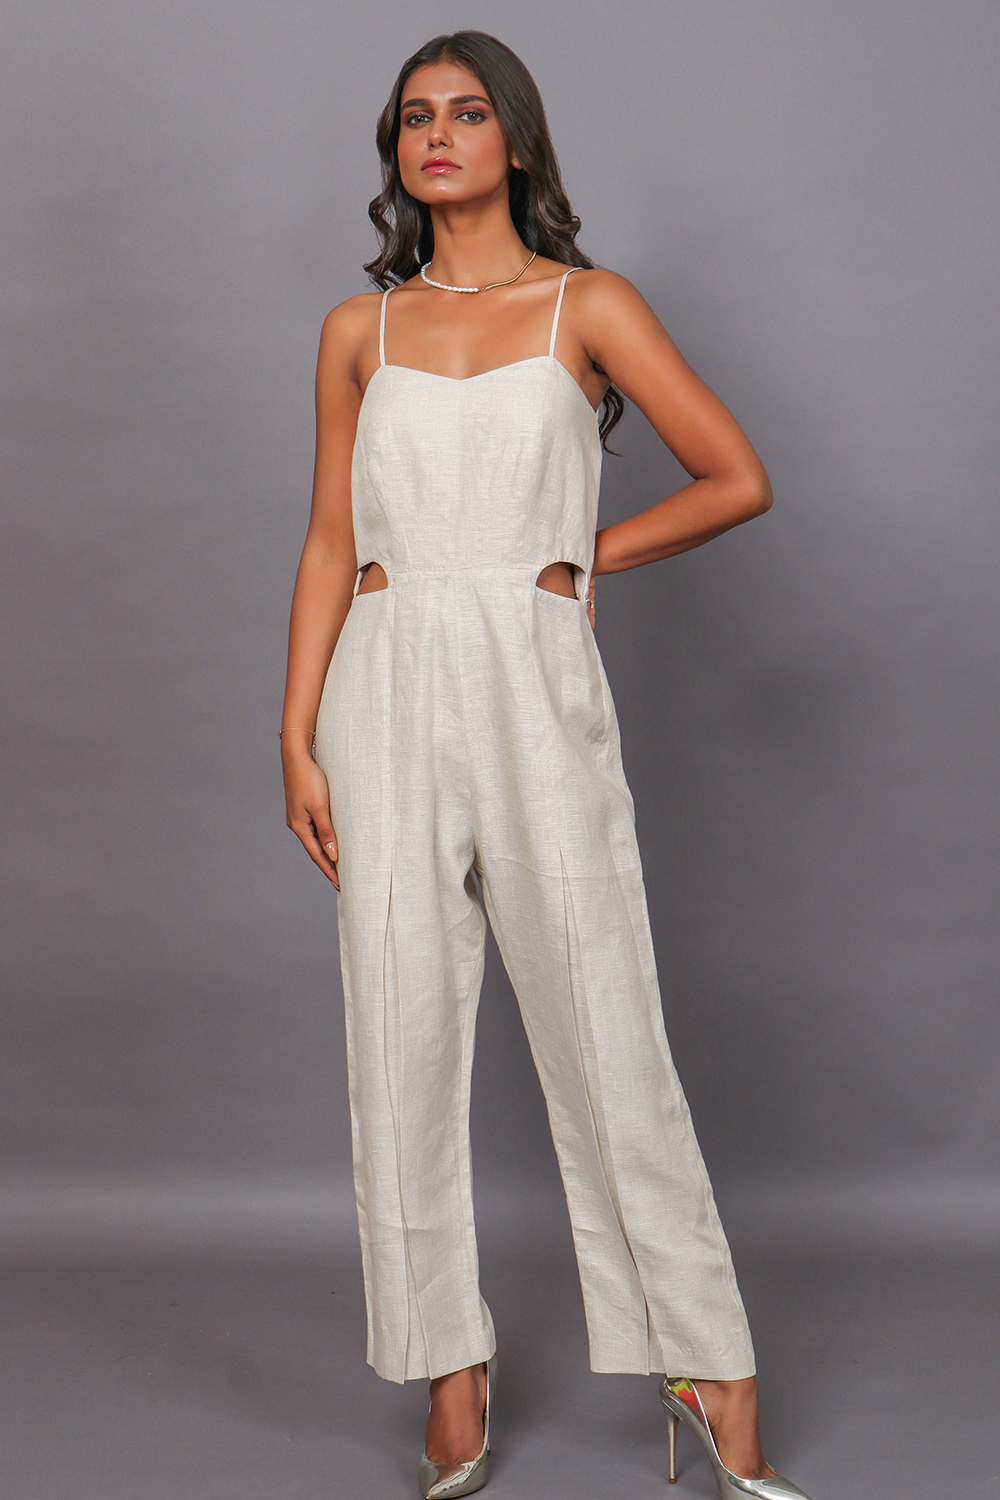 Duster Coat With A Peek-A-Boo Jumpsuit